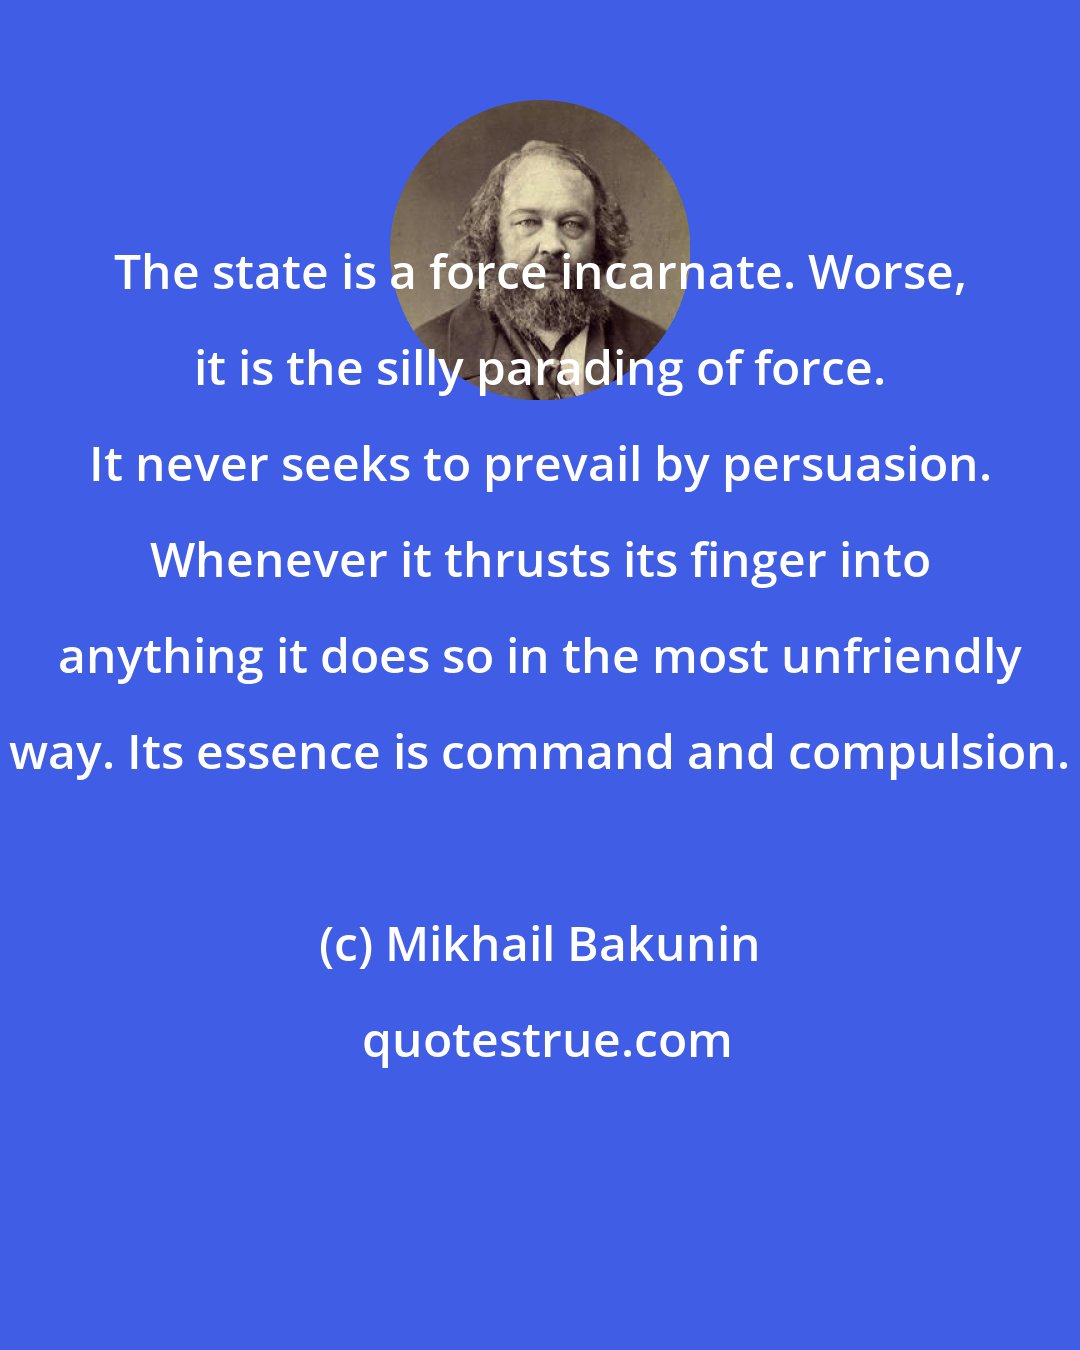 Mikhail Bakunin: The state is a force incarnate. Worse, it is the silly parading of force. It never seeks to prevail by persuasion. Whenever it thrusts its finger into anything it does so in the most unfriendly way. Its essence is command and compulsion.